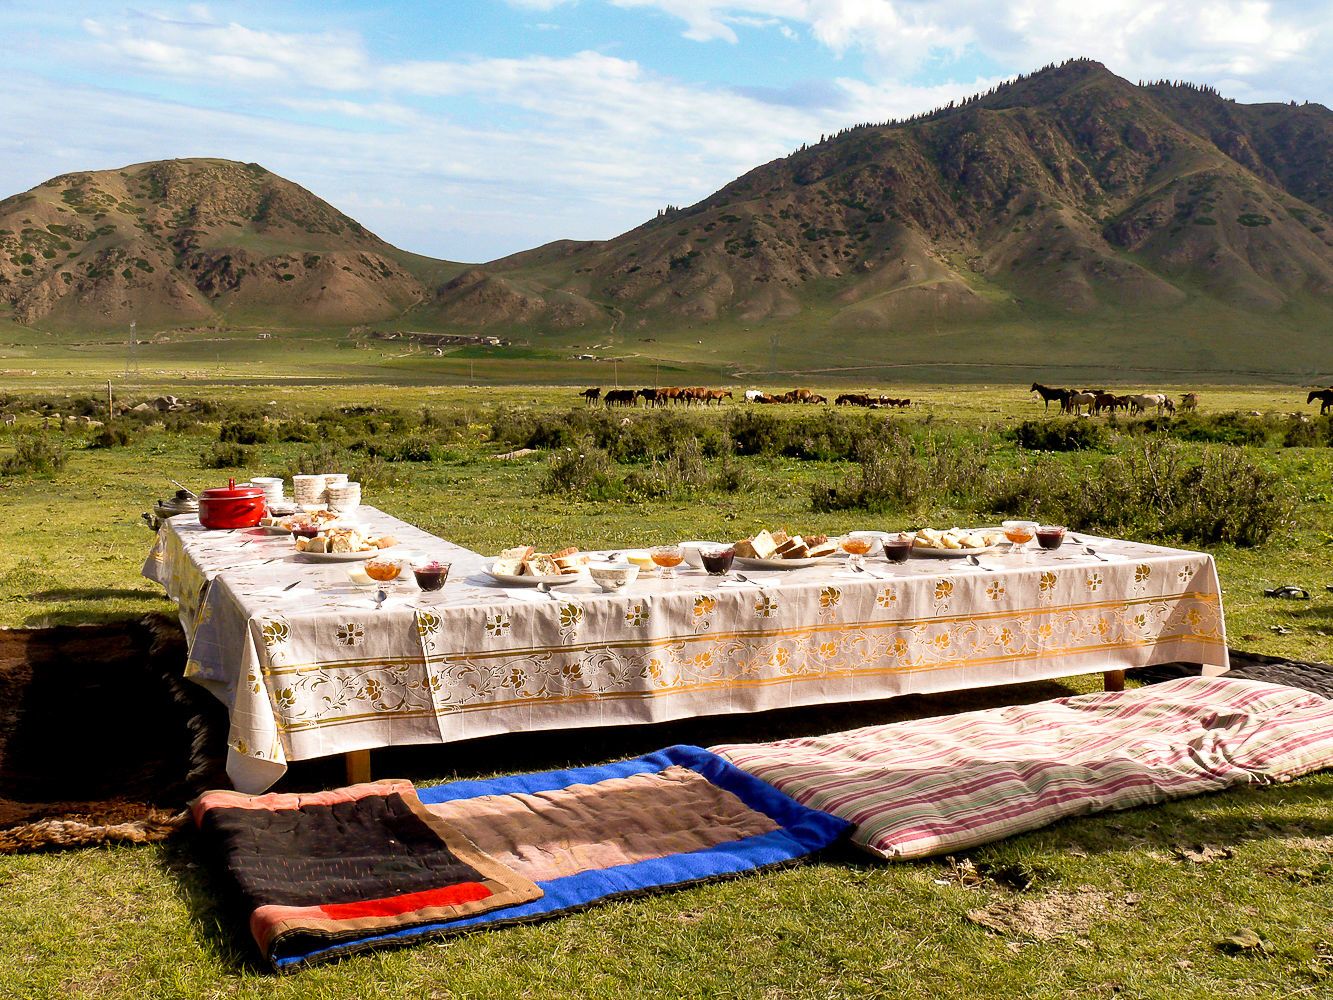 Table for breakfast in the mountains central Asia